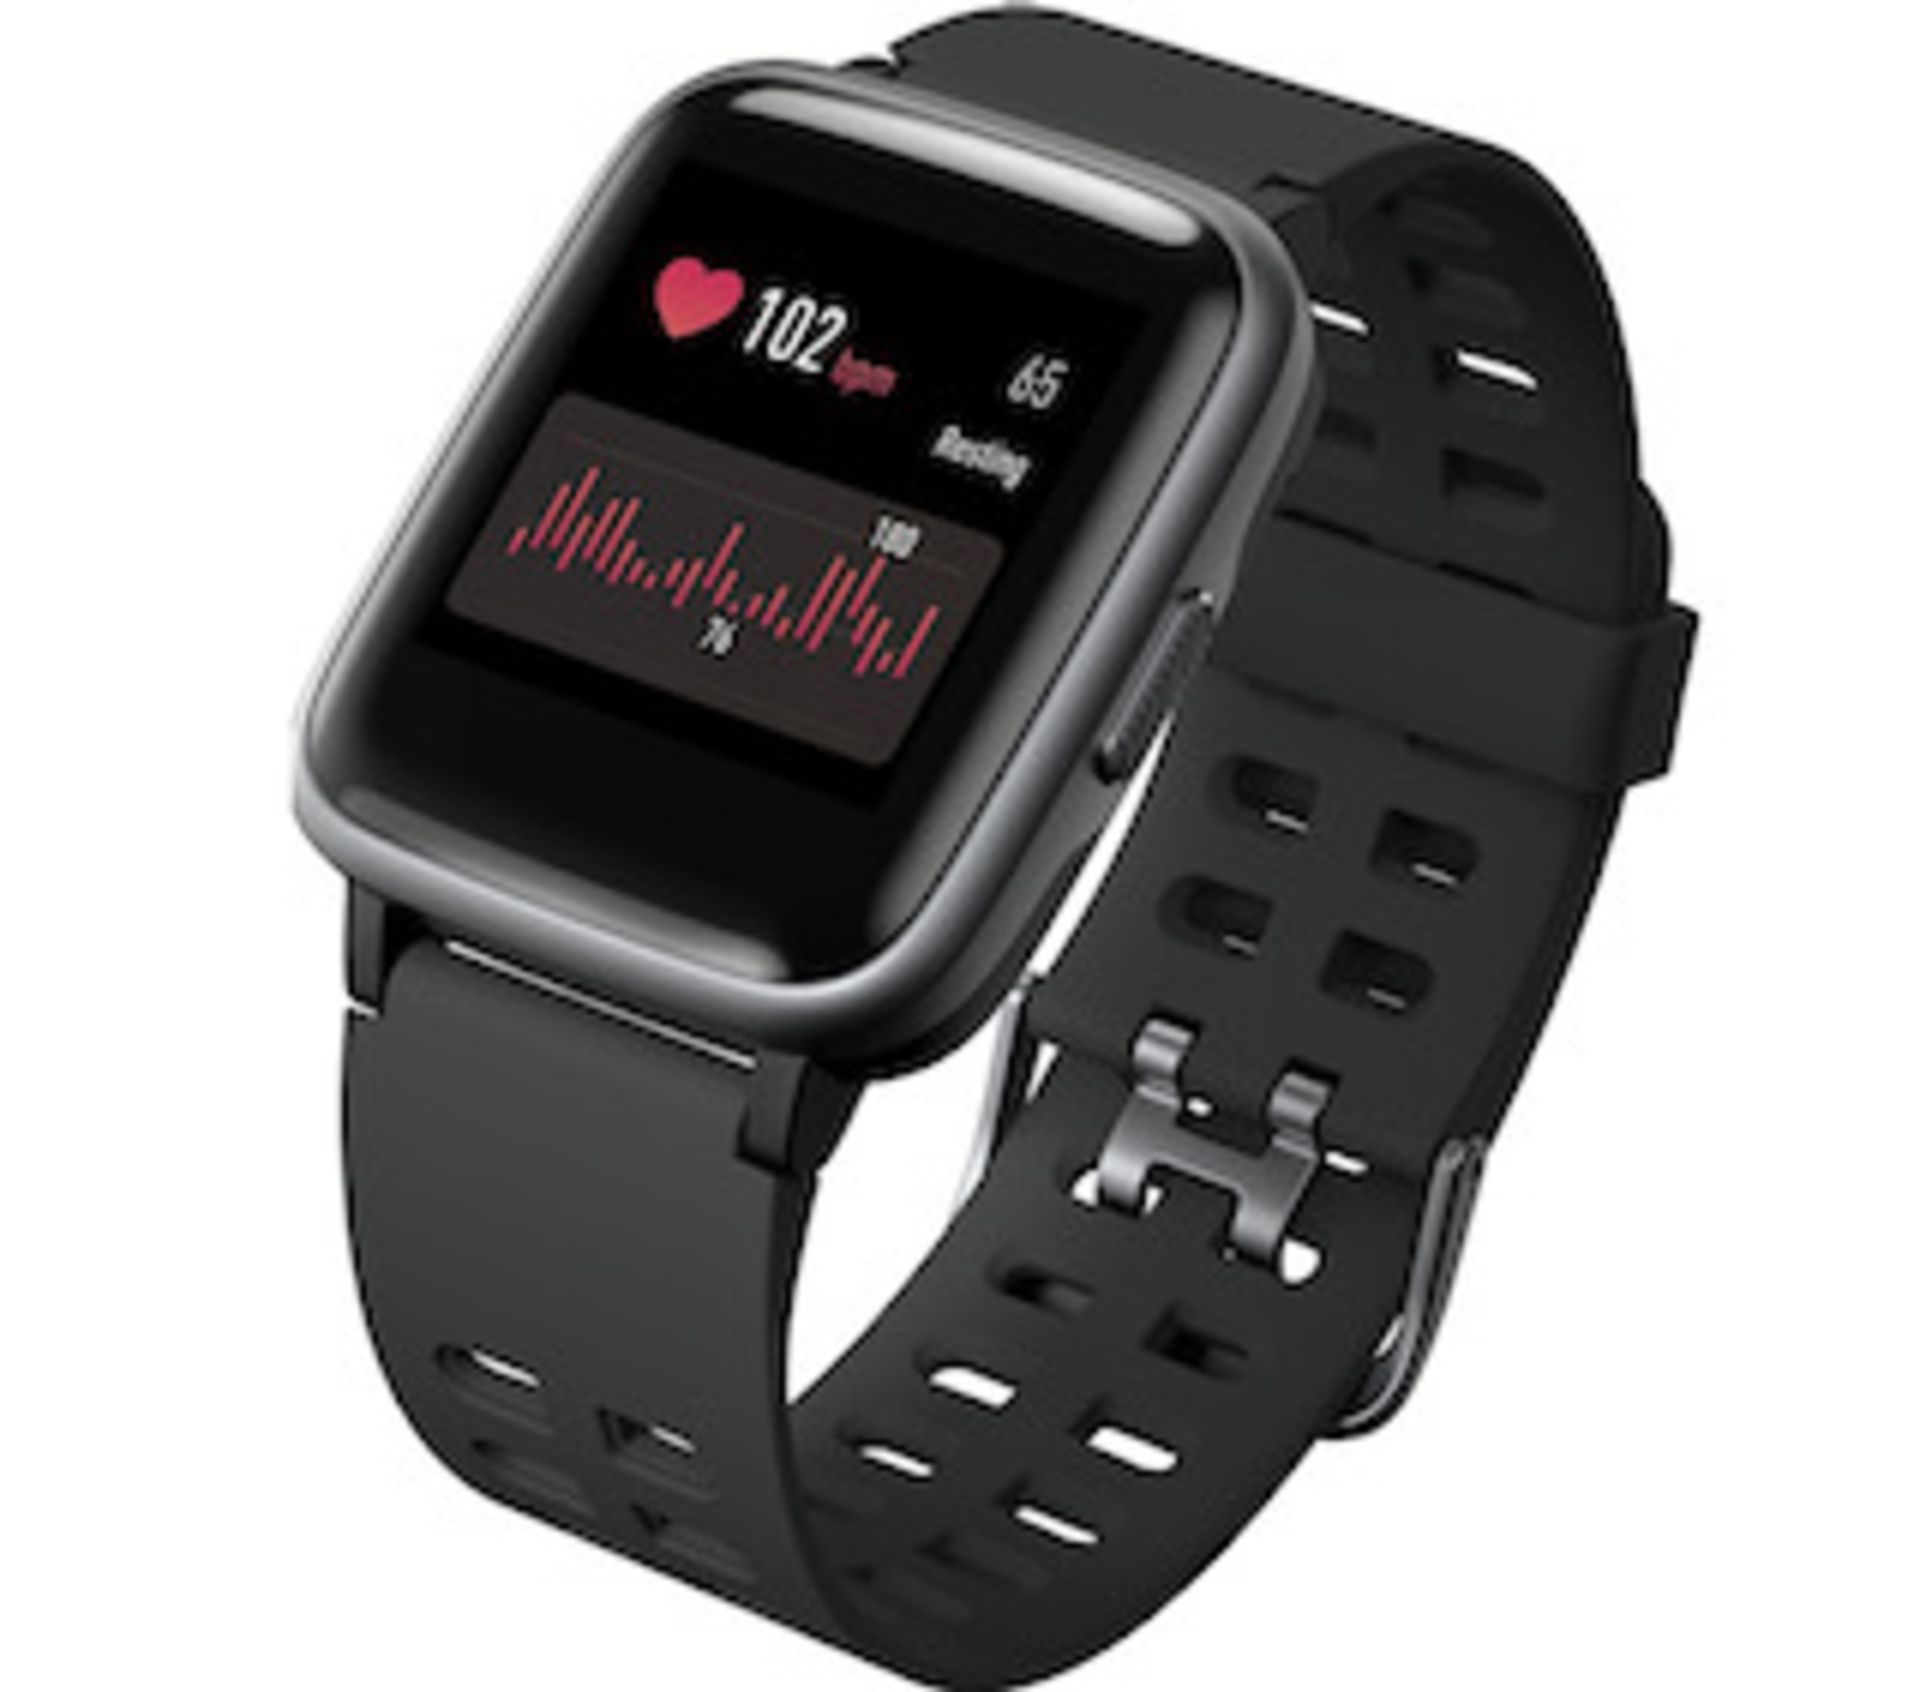 Brand New Unisex Fitness Tracker Watch Id205 Black Strap About This Item 1.3-Inch LCD Colour - Image 14 of 30